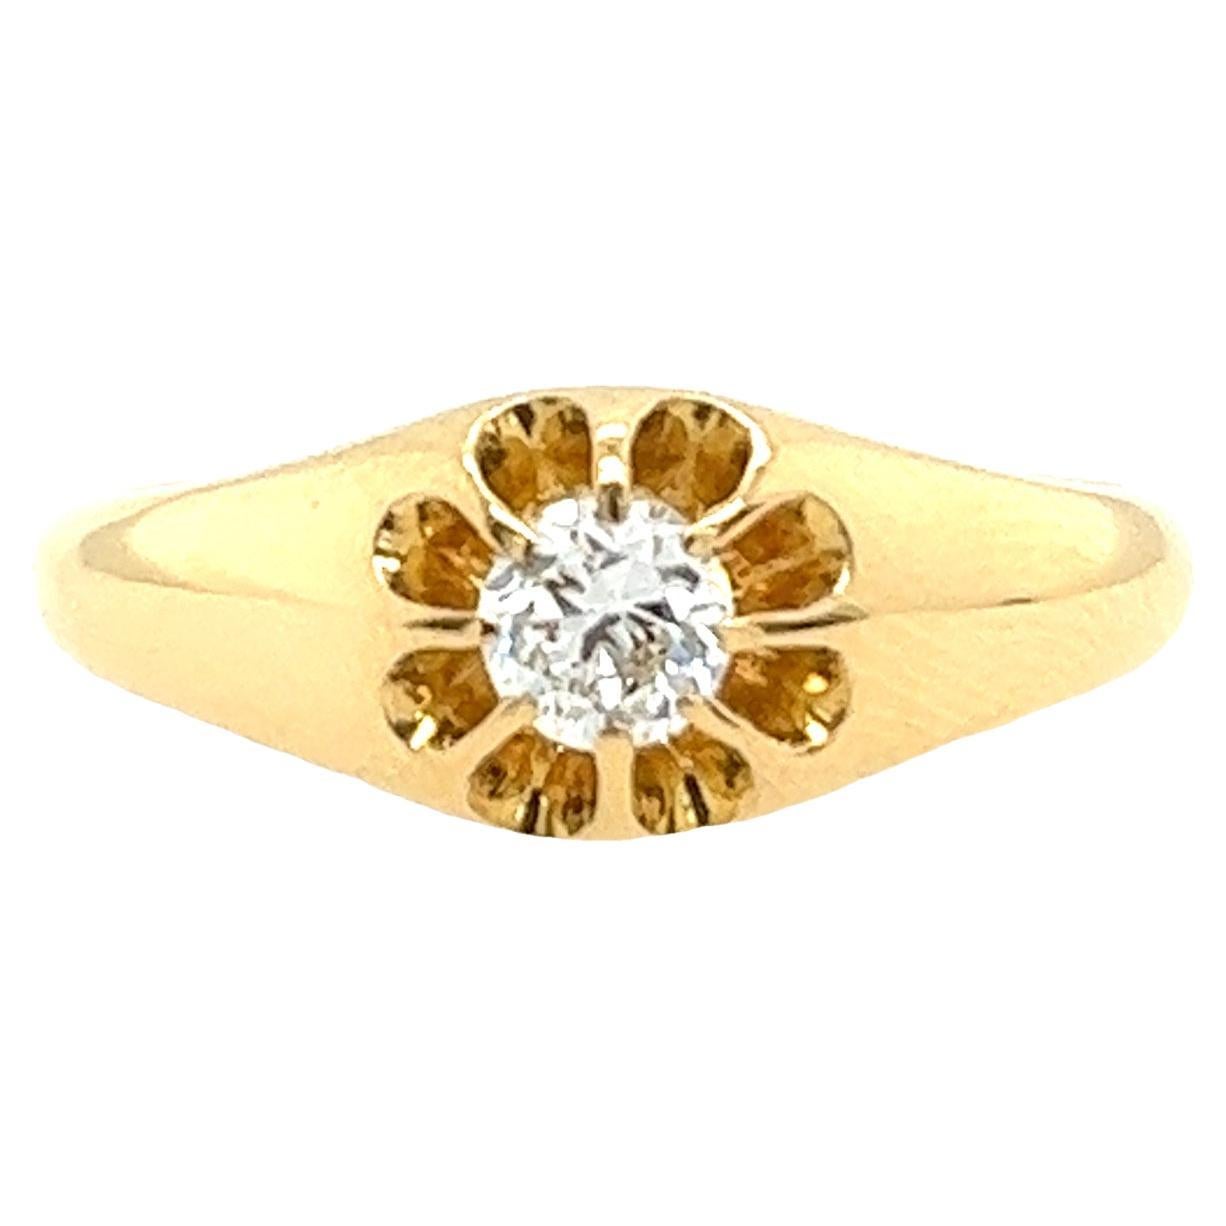 18ct Yellow Gold Diamond Signet Dress Ring Set With 0.20ct old cut diamond For Sale